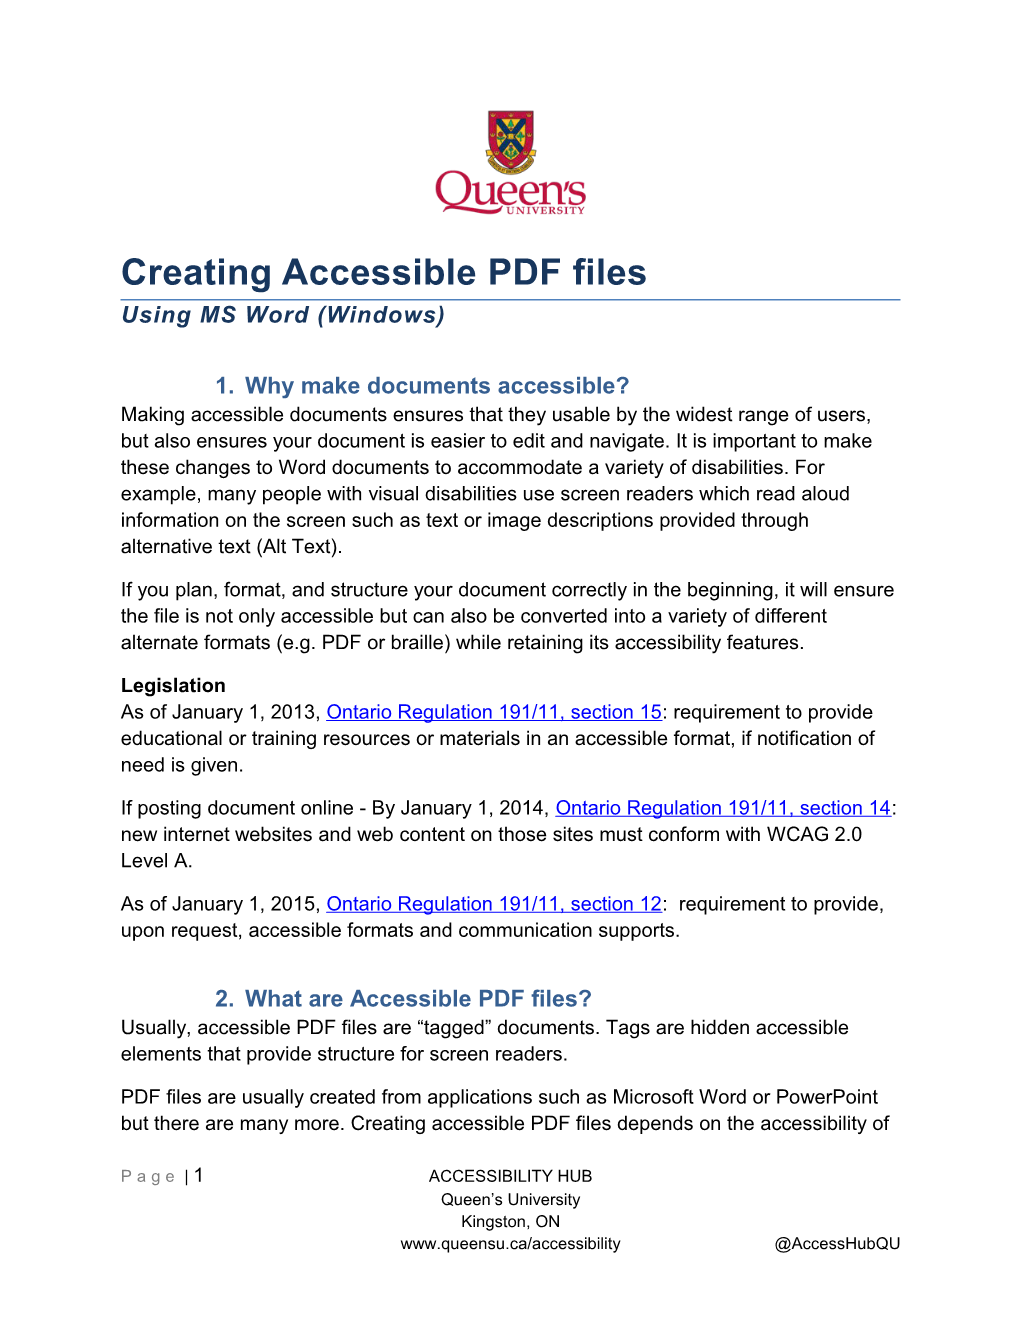 Creating Accessible PDF Files Using MS Word for Windows